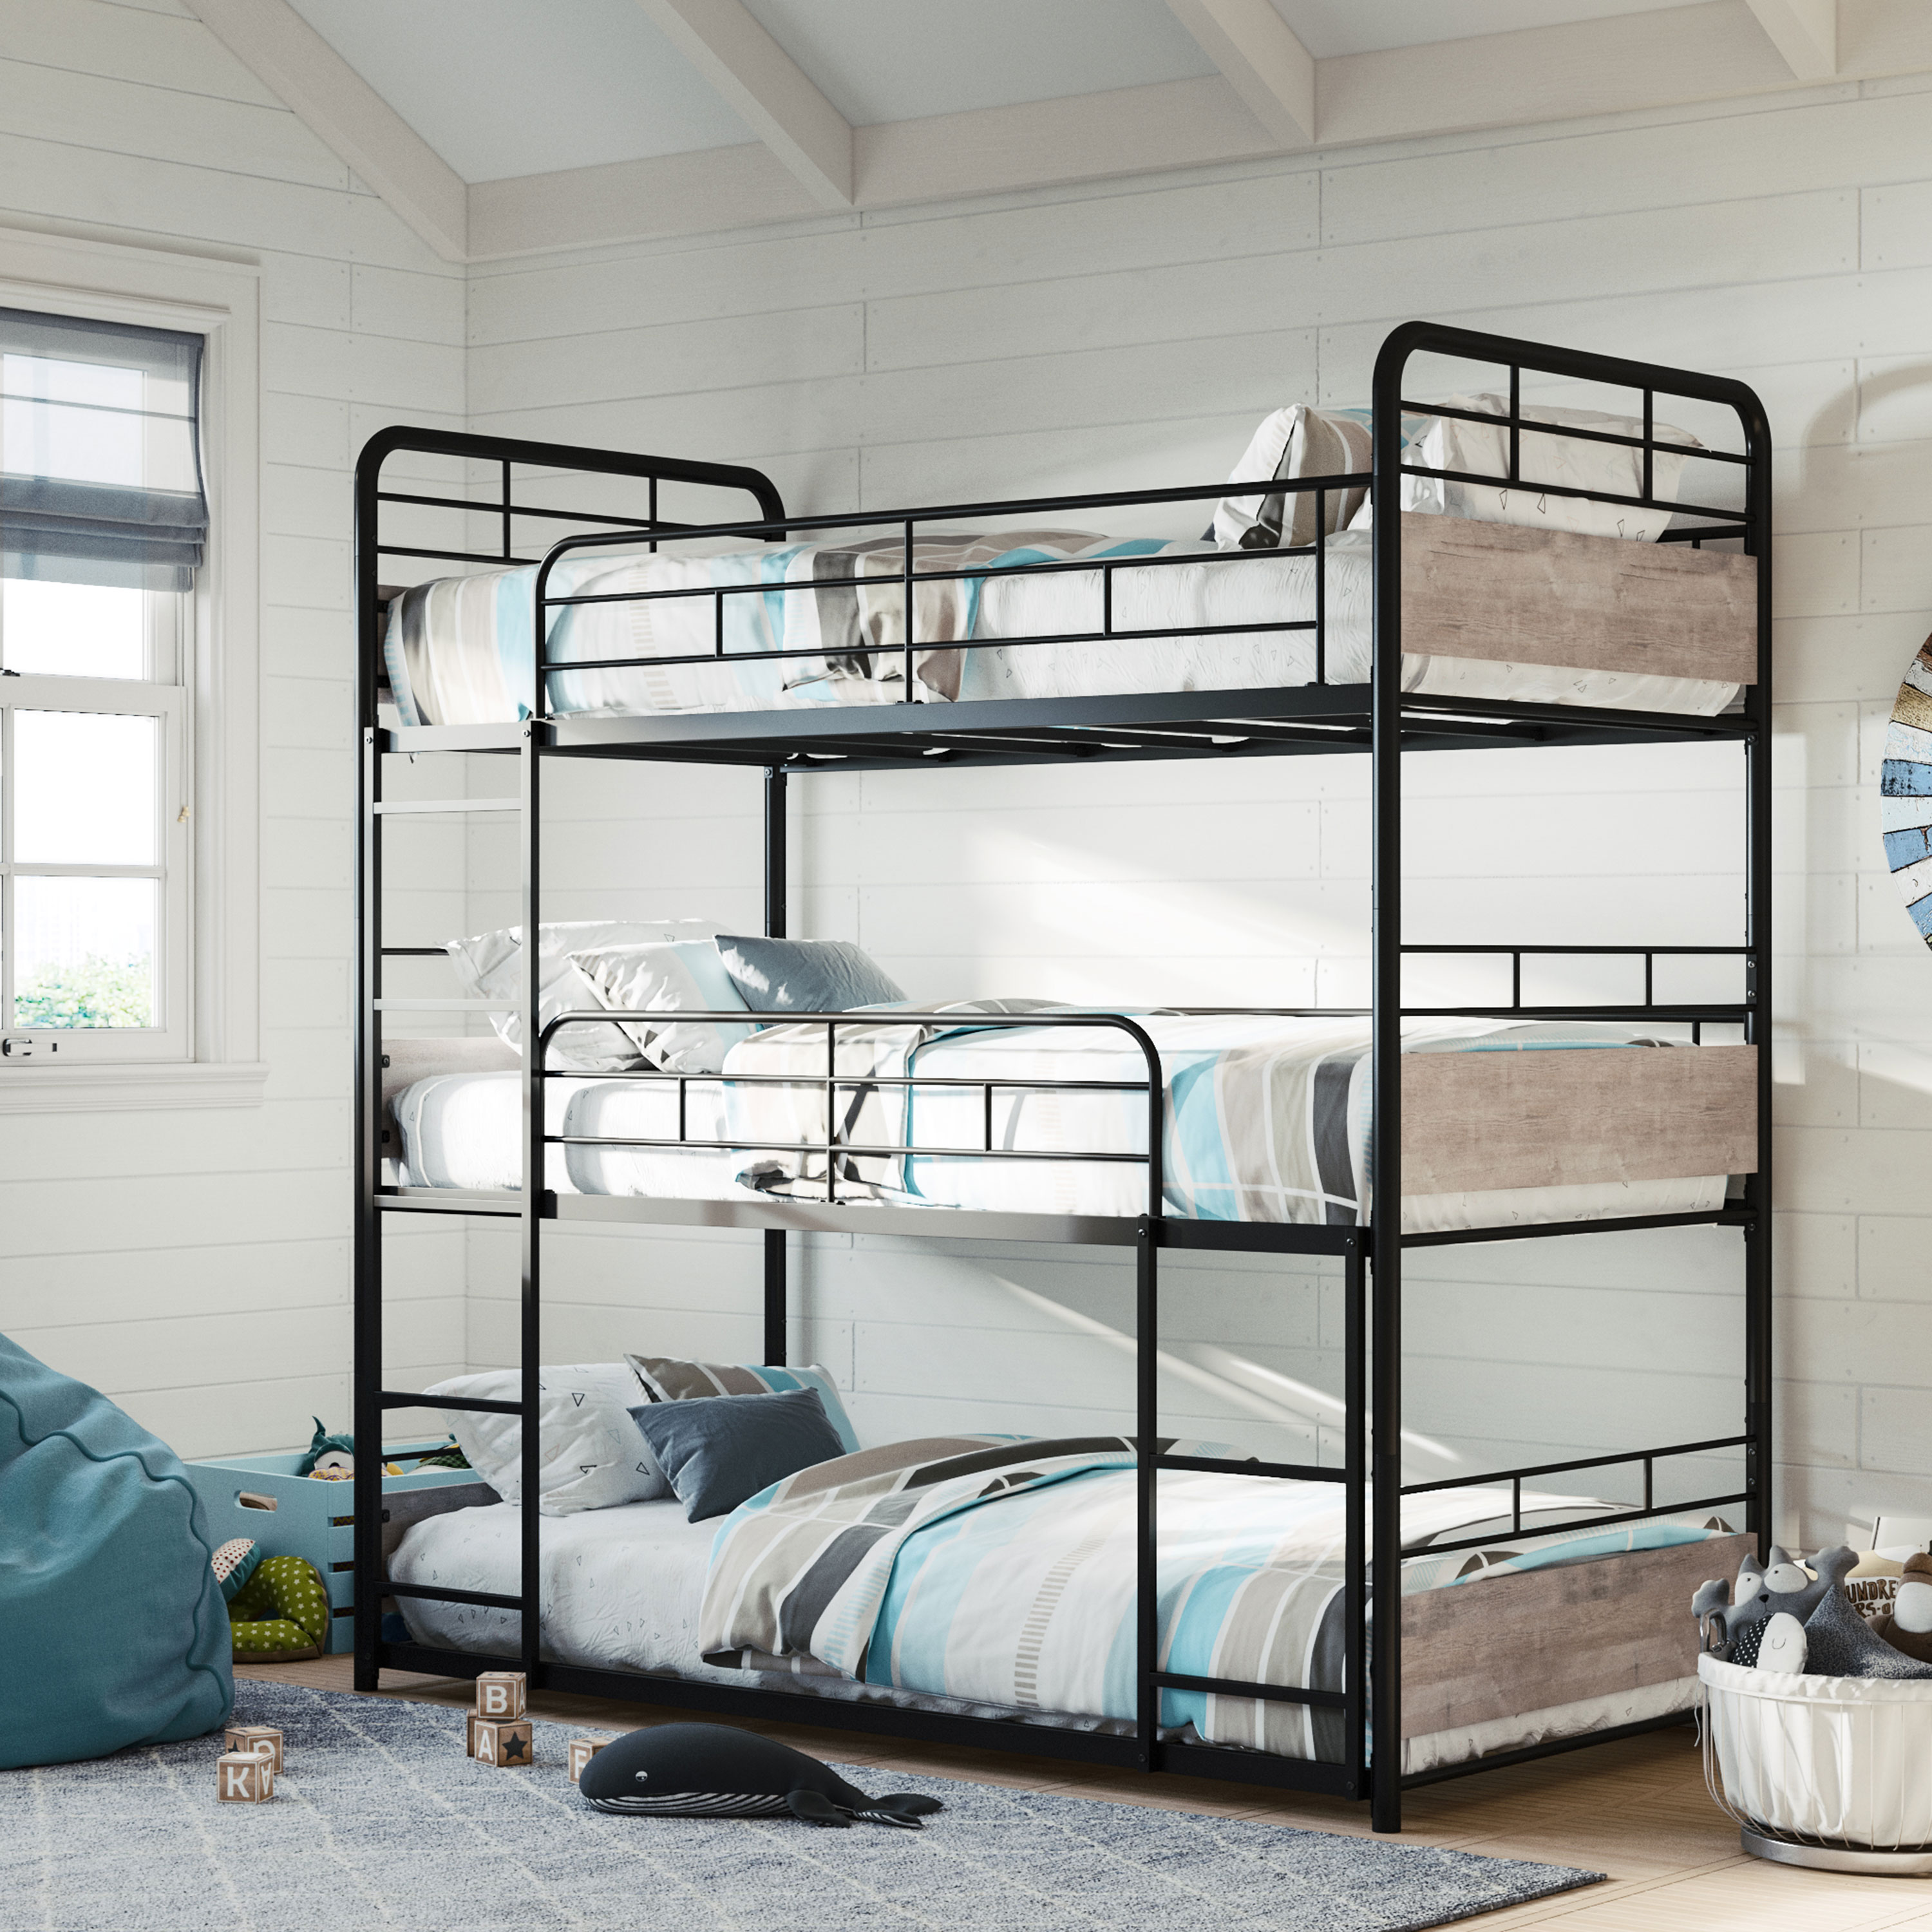 Better Homes & Gardens Anniston Convertible Black Metal Triple Twin Bunk Bed, Gray Wood Accents - image 20 of 26